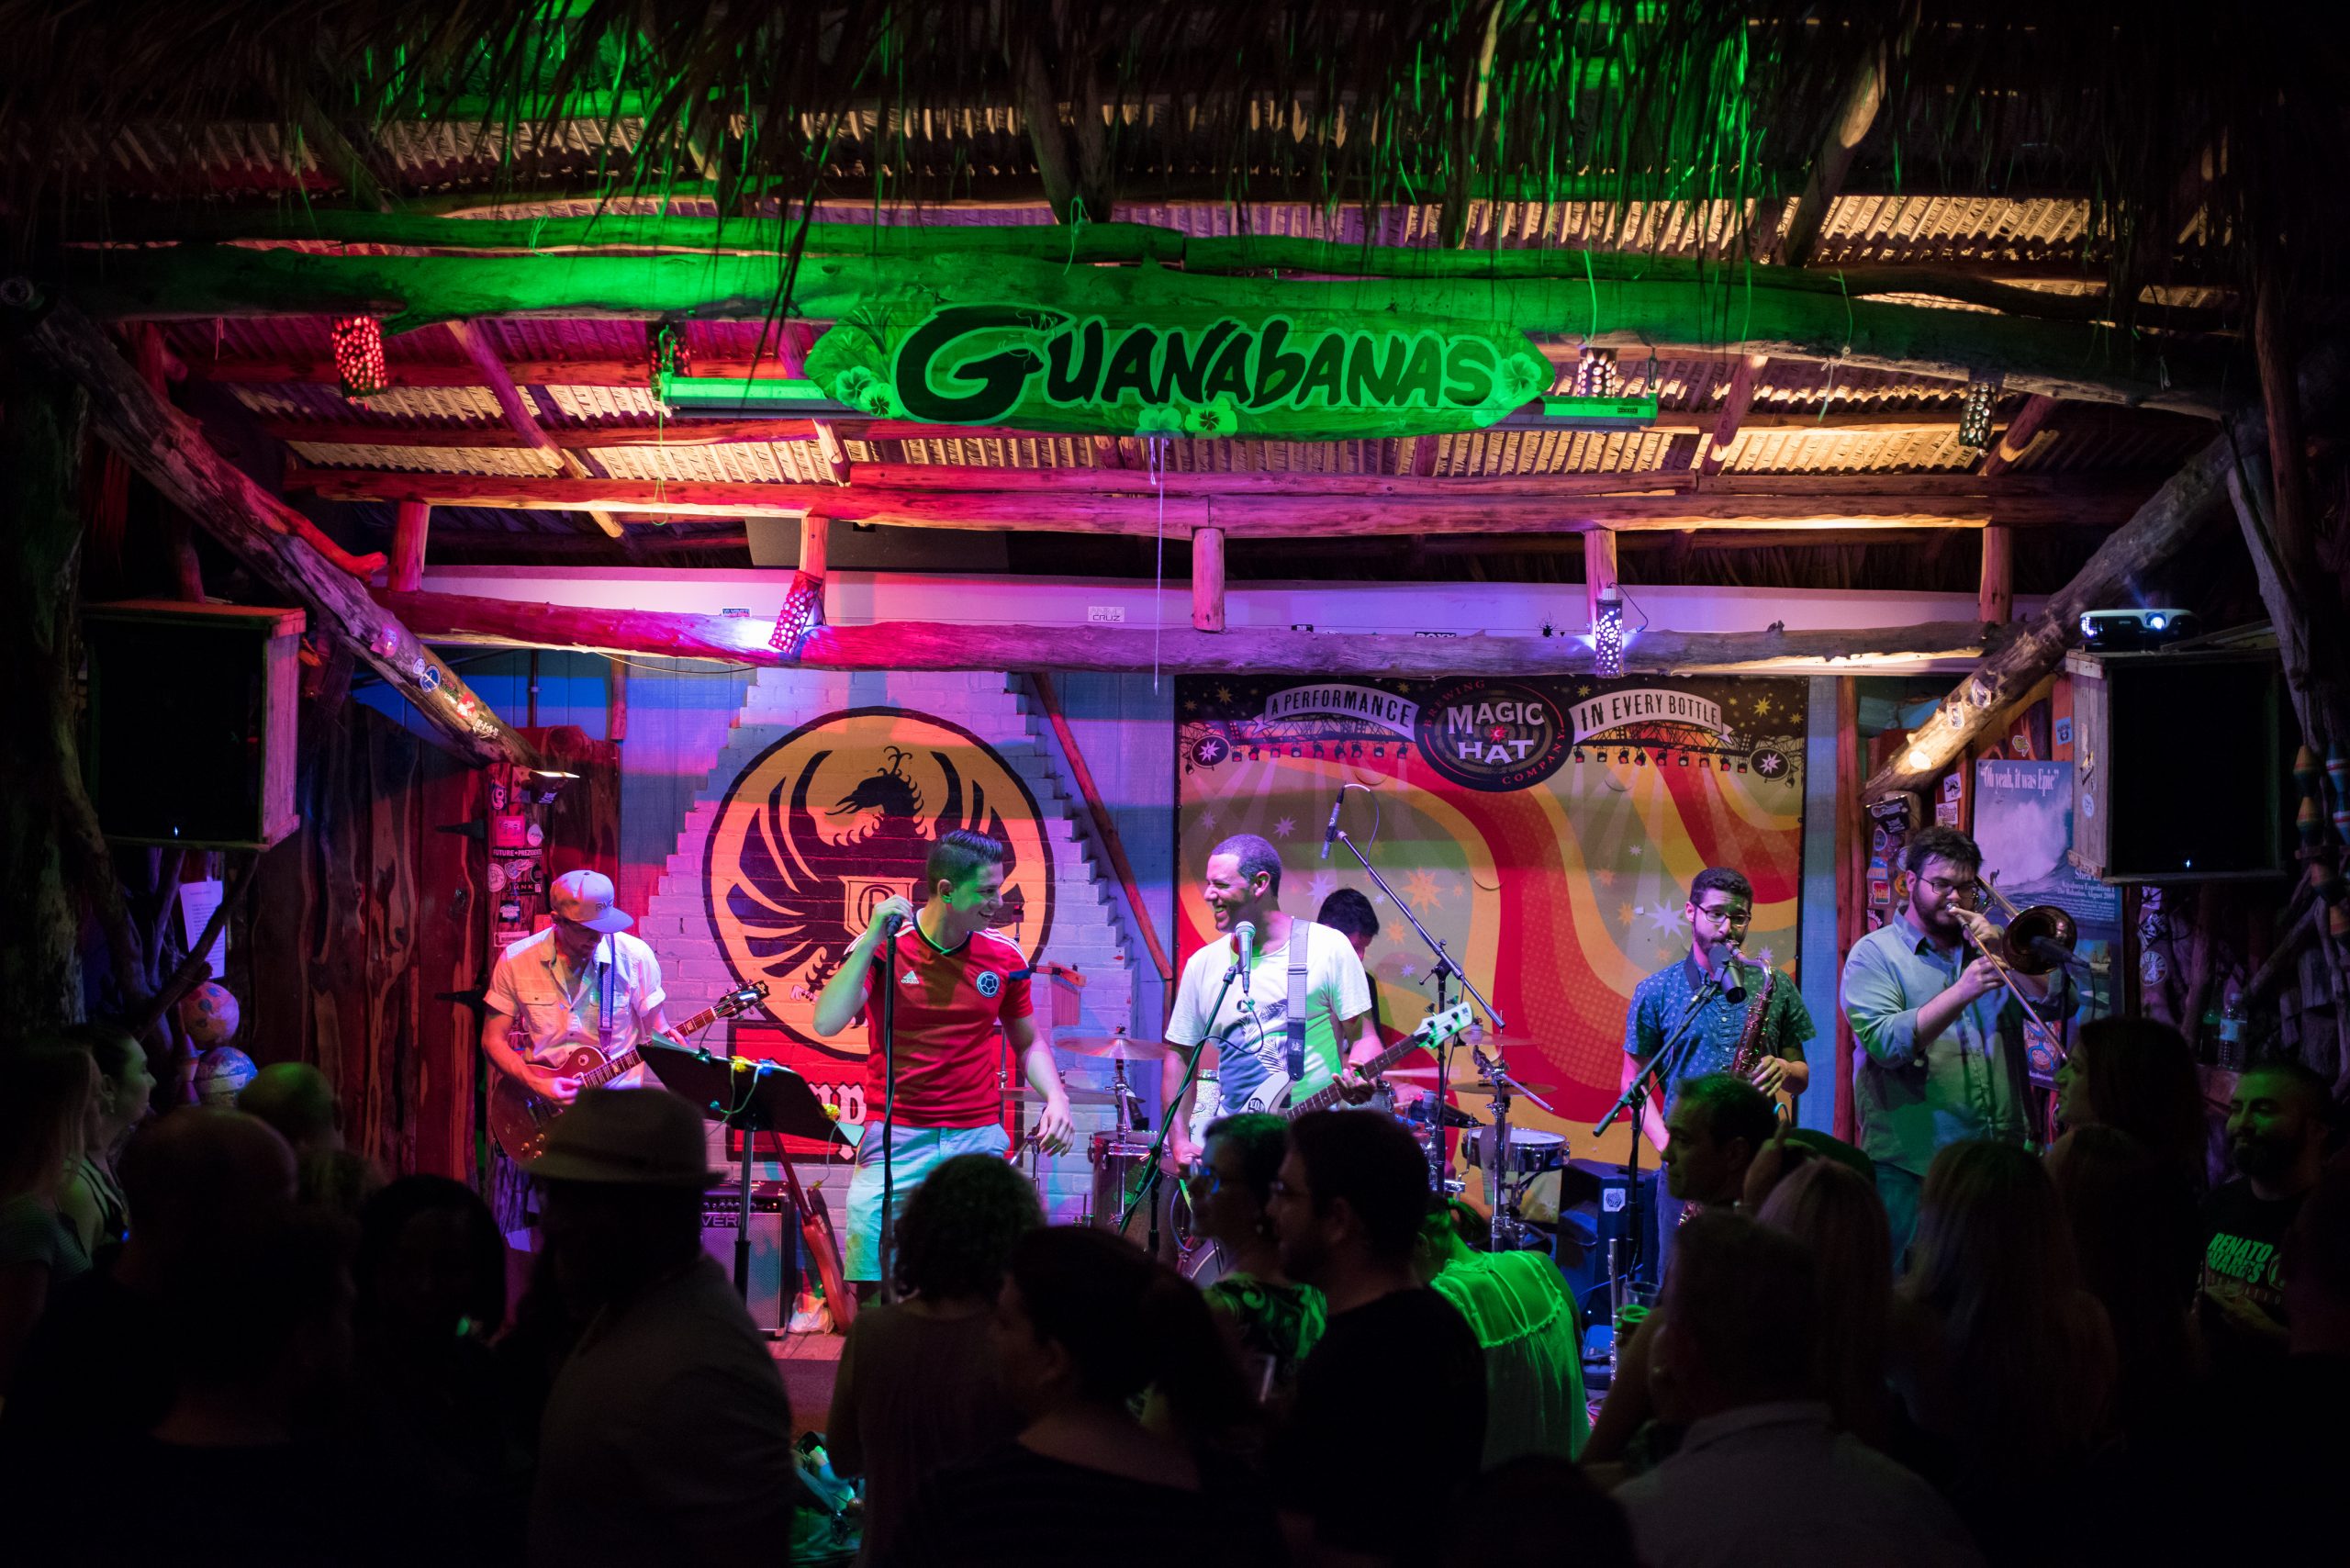 Moska Project performing live music on Guanabanas, Jupiter, stage.